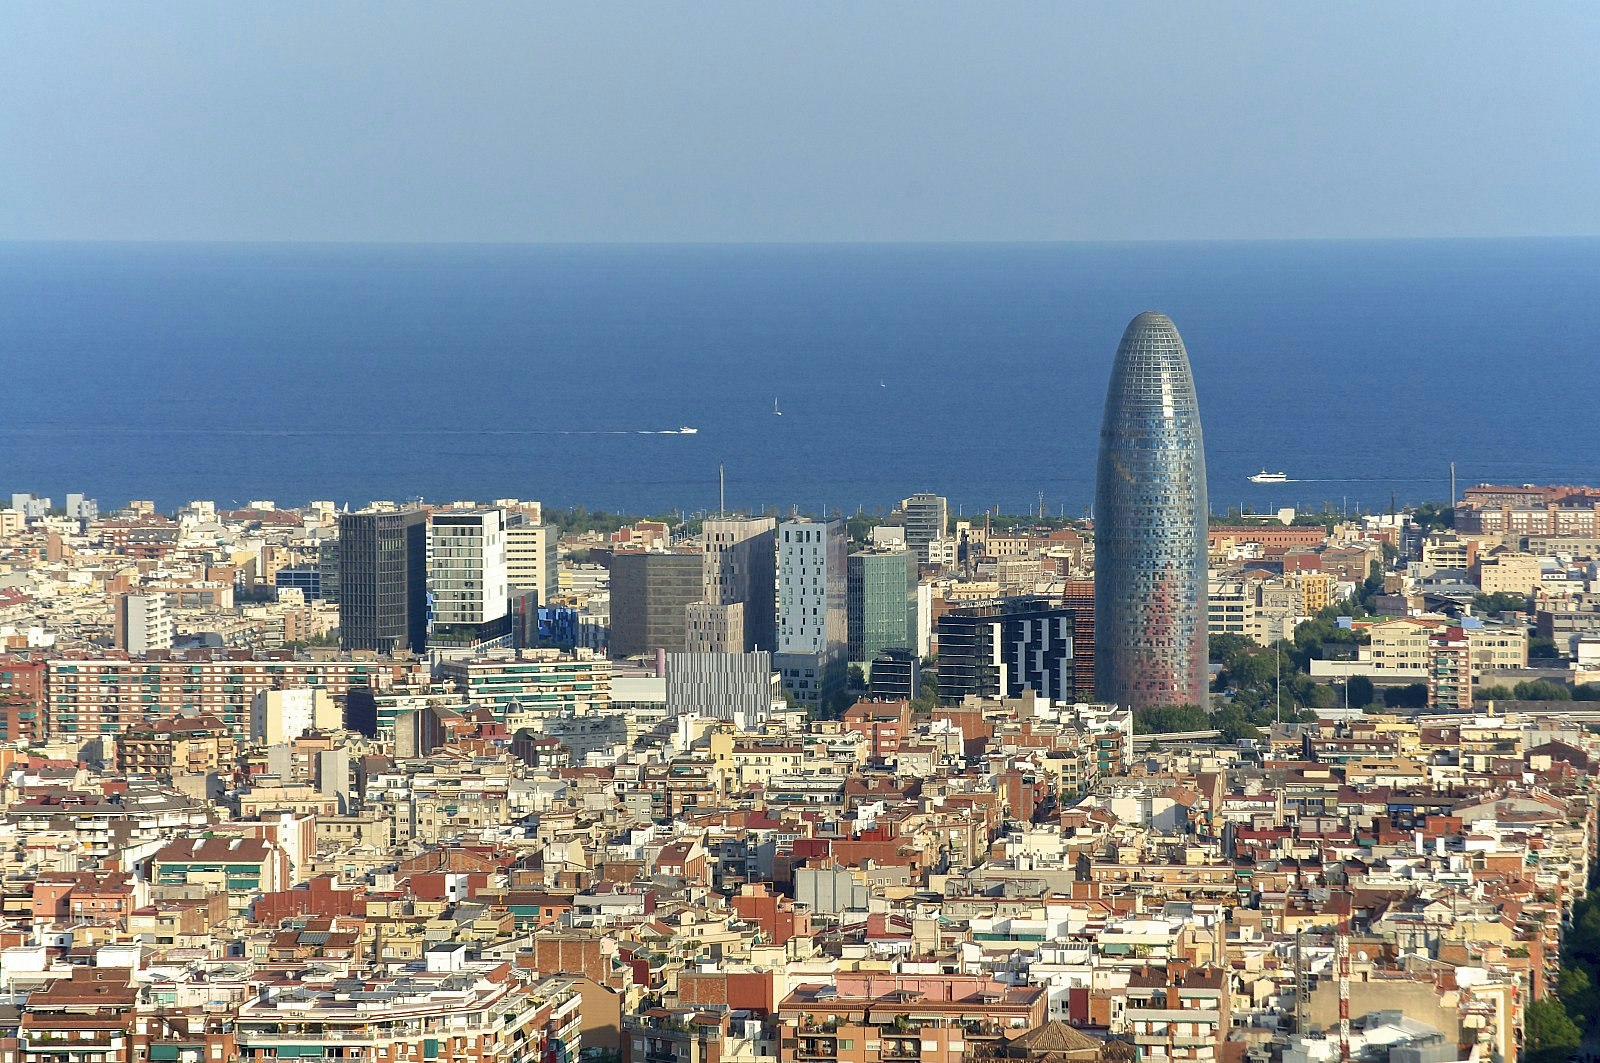 Looking over the skyline of Poblenou, with modern skyscrapers in the background and the blue Mediterranean beyond. 